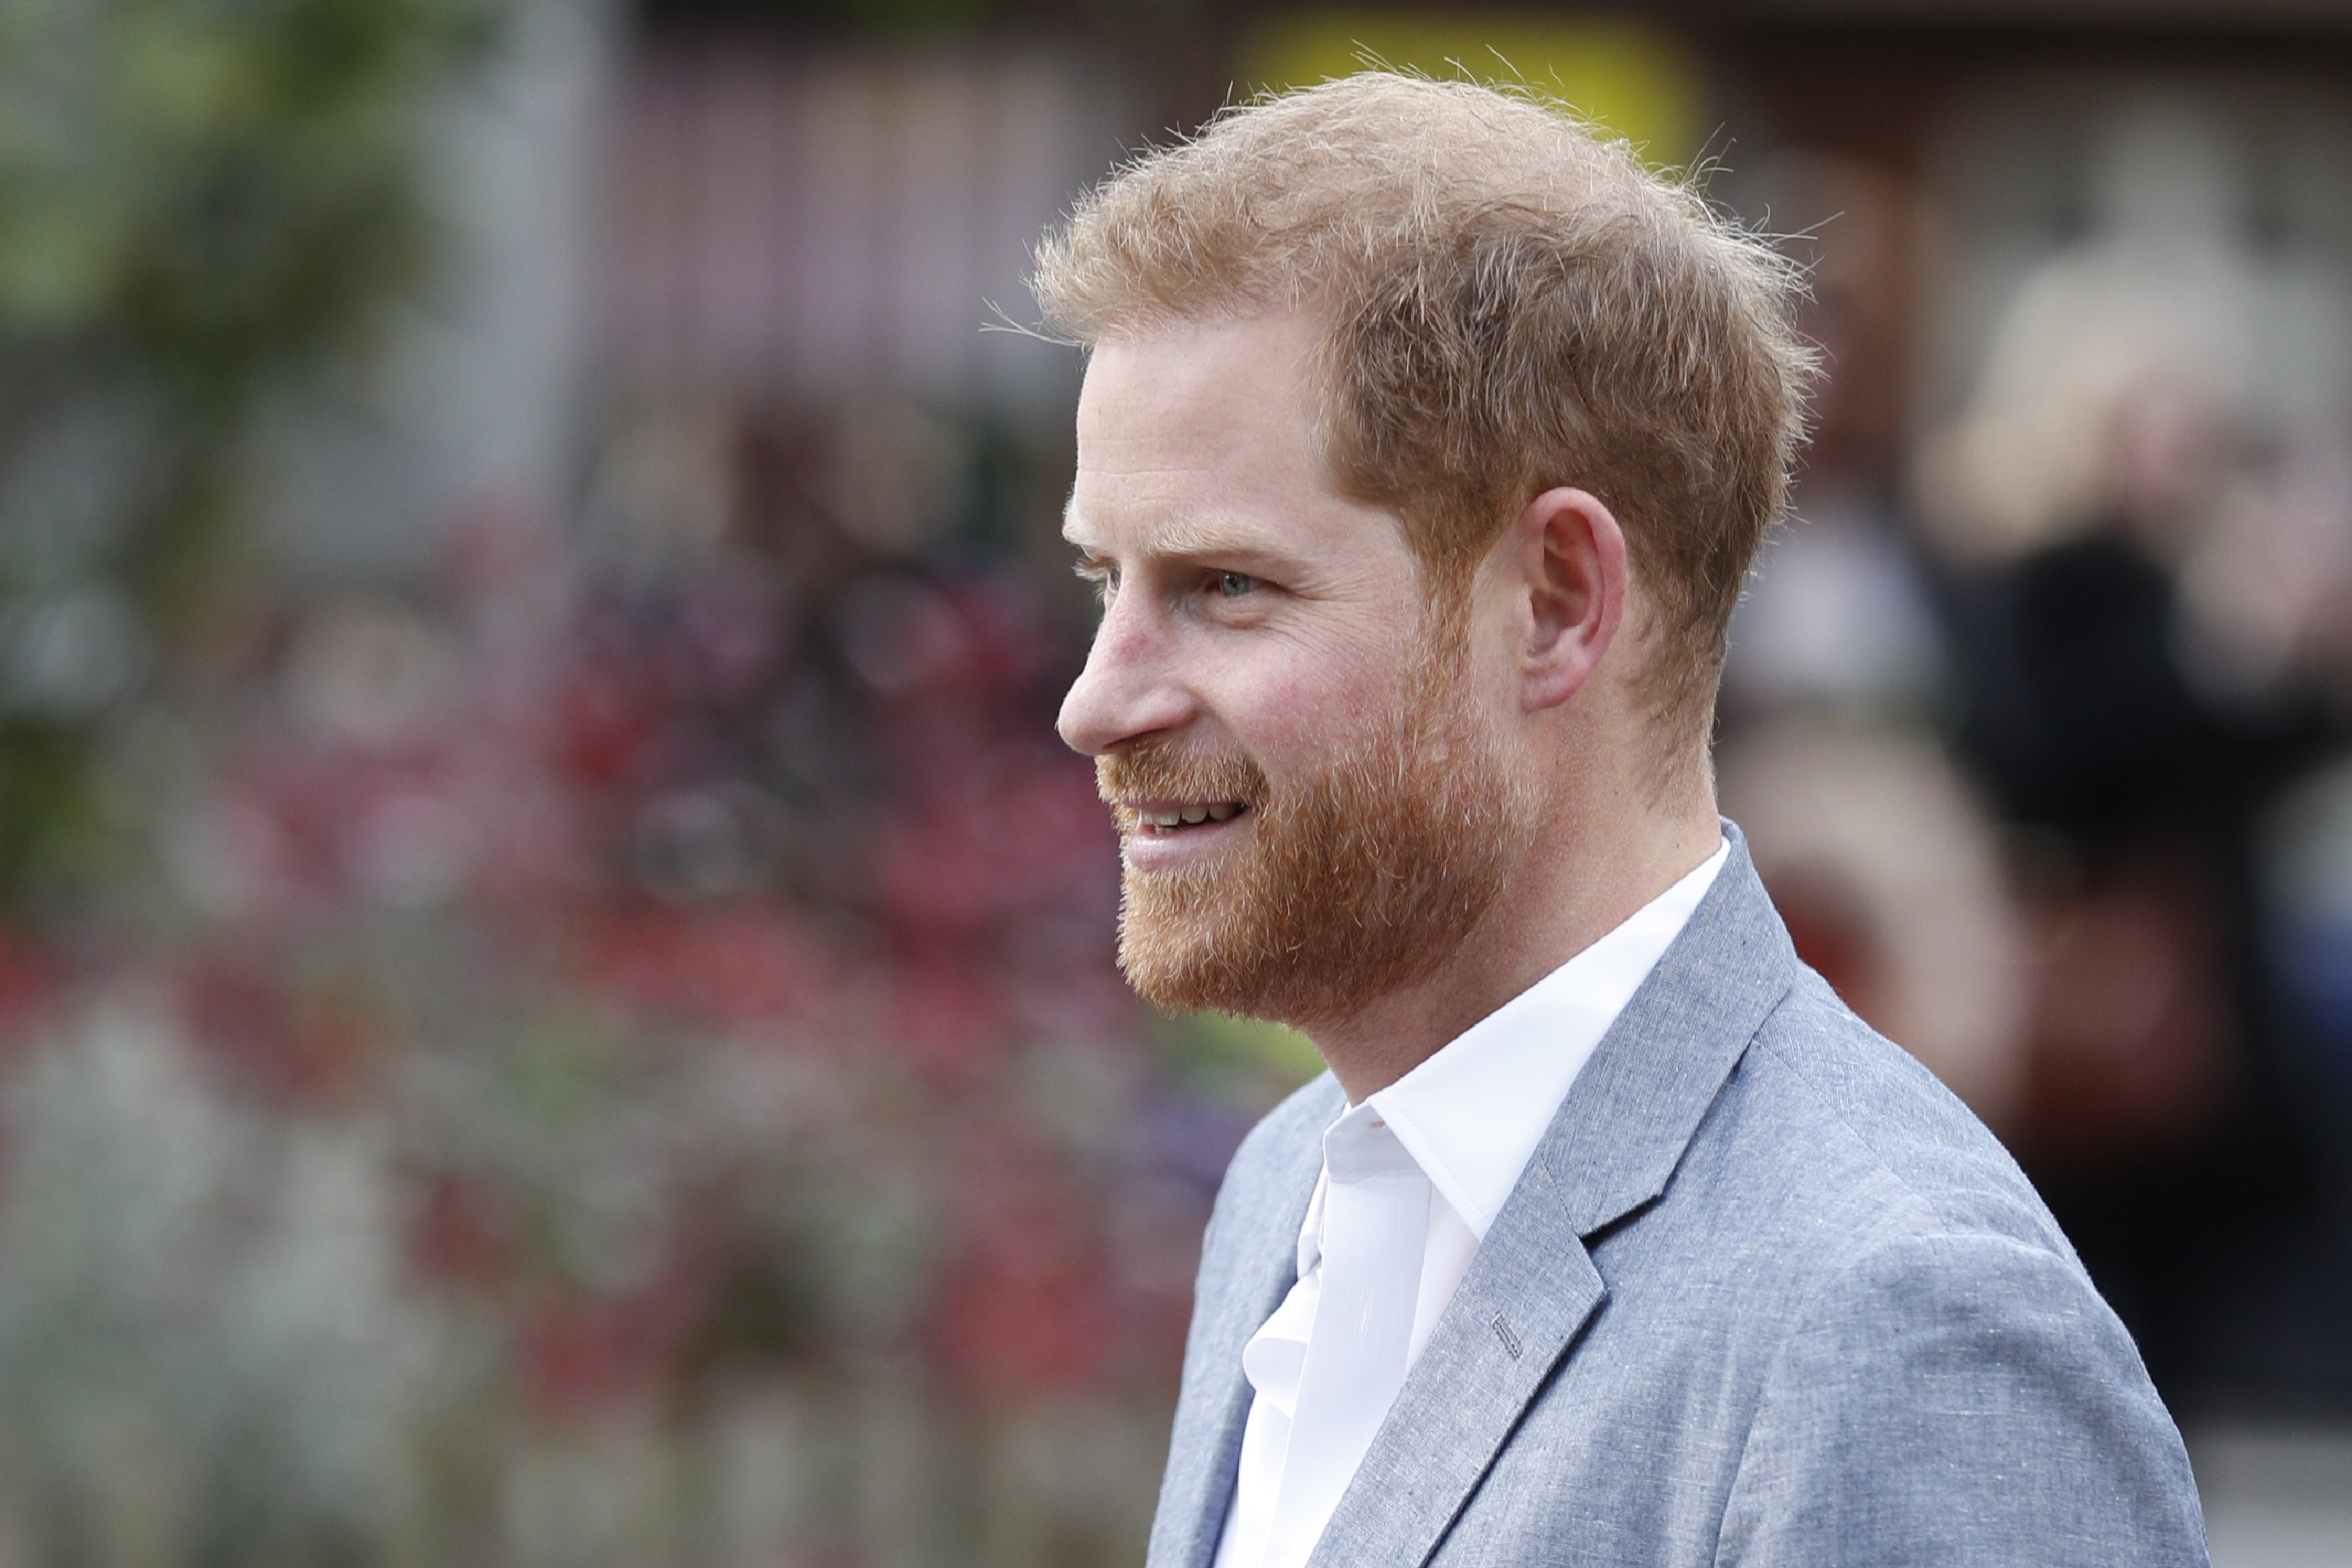 Britain's Prince Harry, Duke of Sussex visits YMCA South Ealing, on April 3, 2019 in London, England. | Source: Getty Images